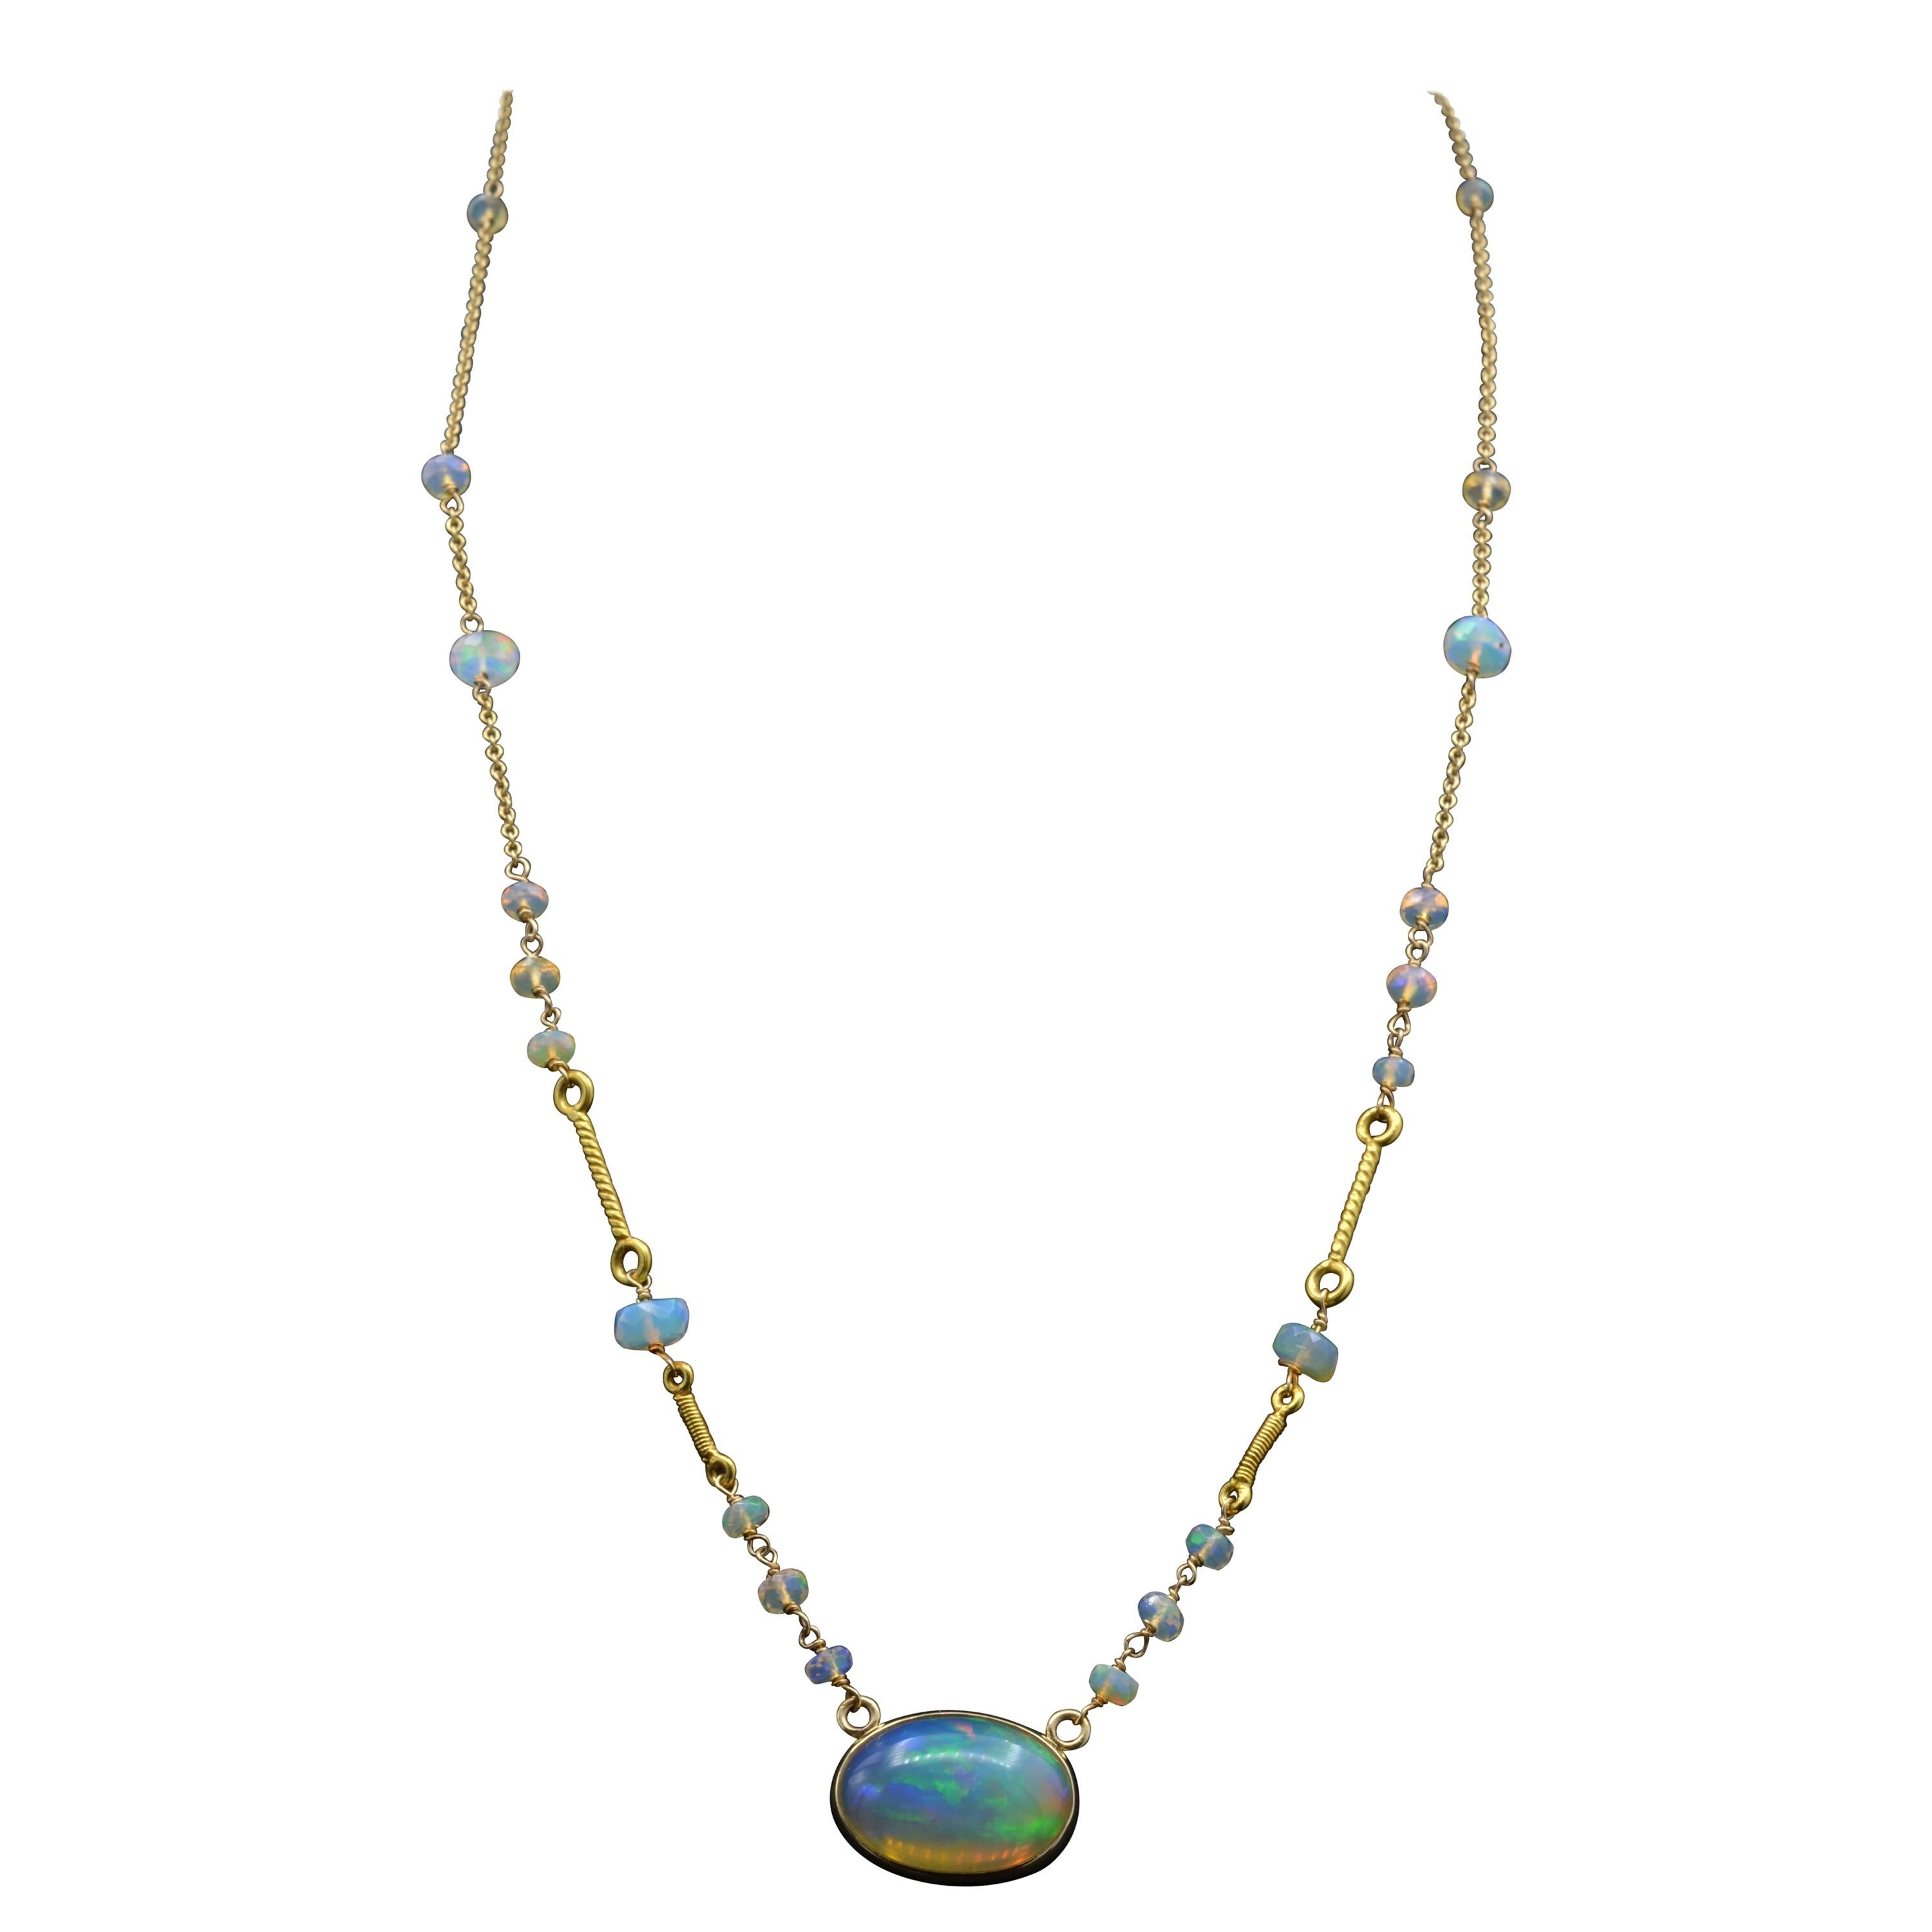 Large Oval Opal Necklace with Opal Beads in 14 Karat Gold